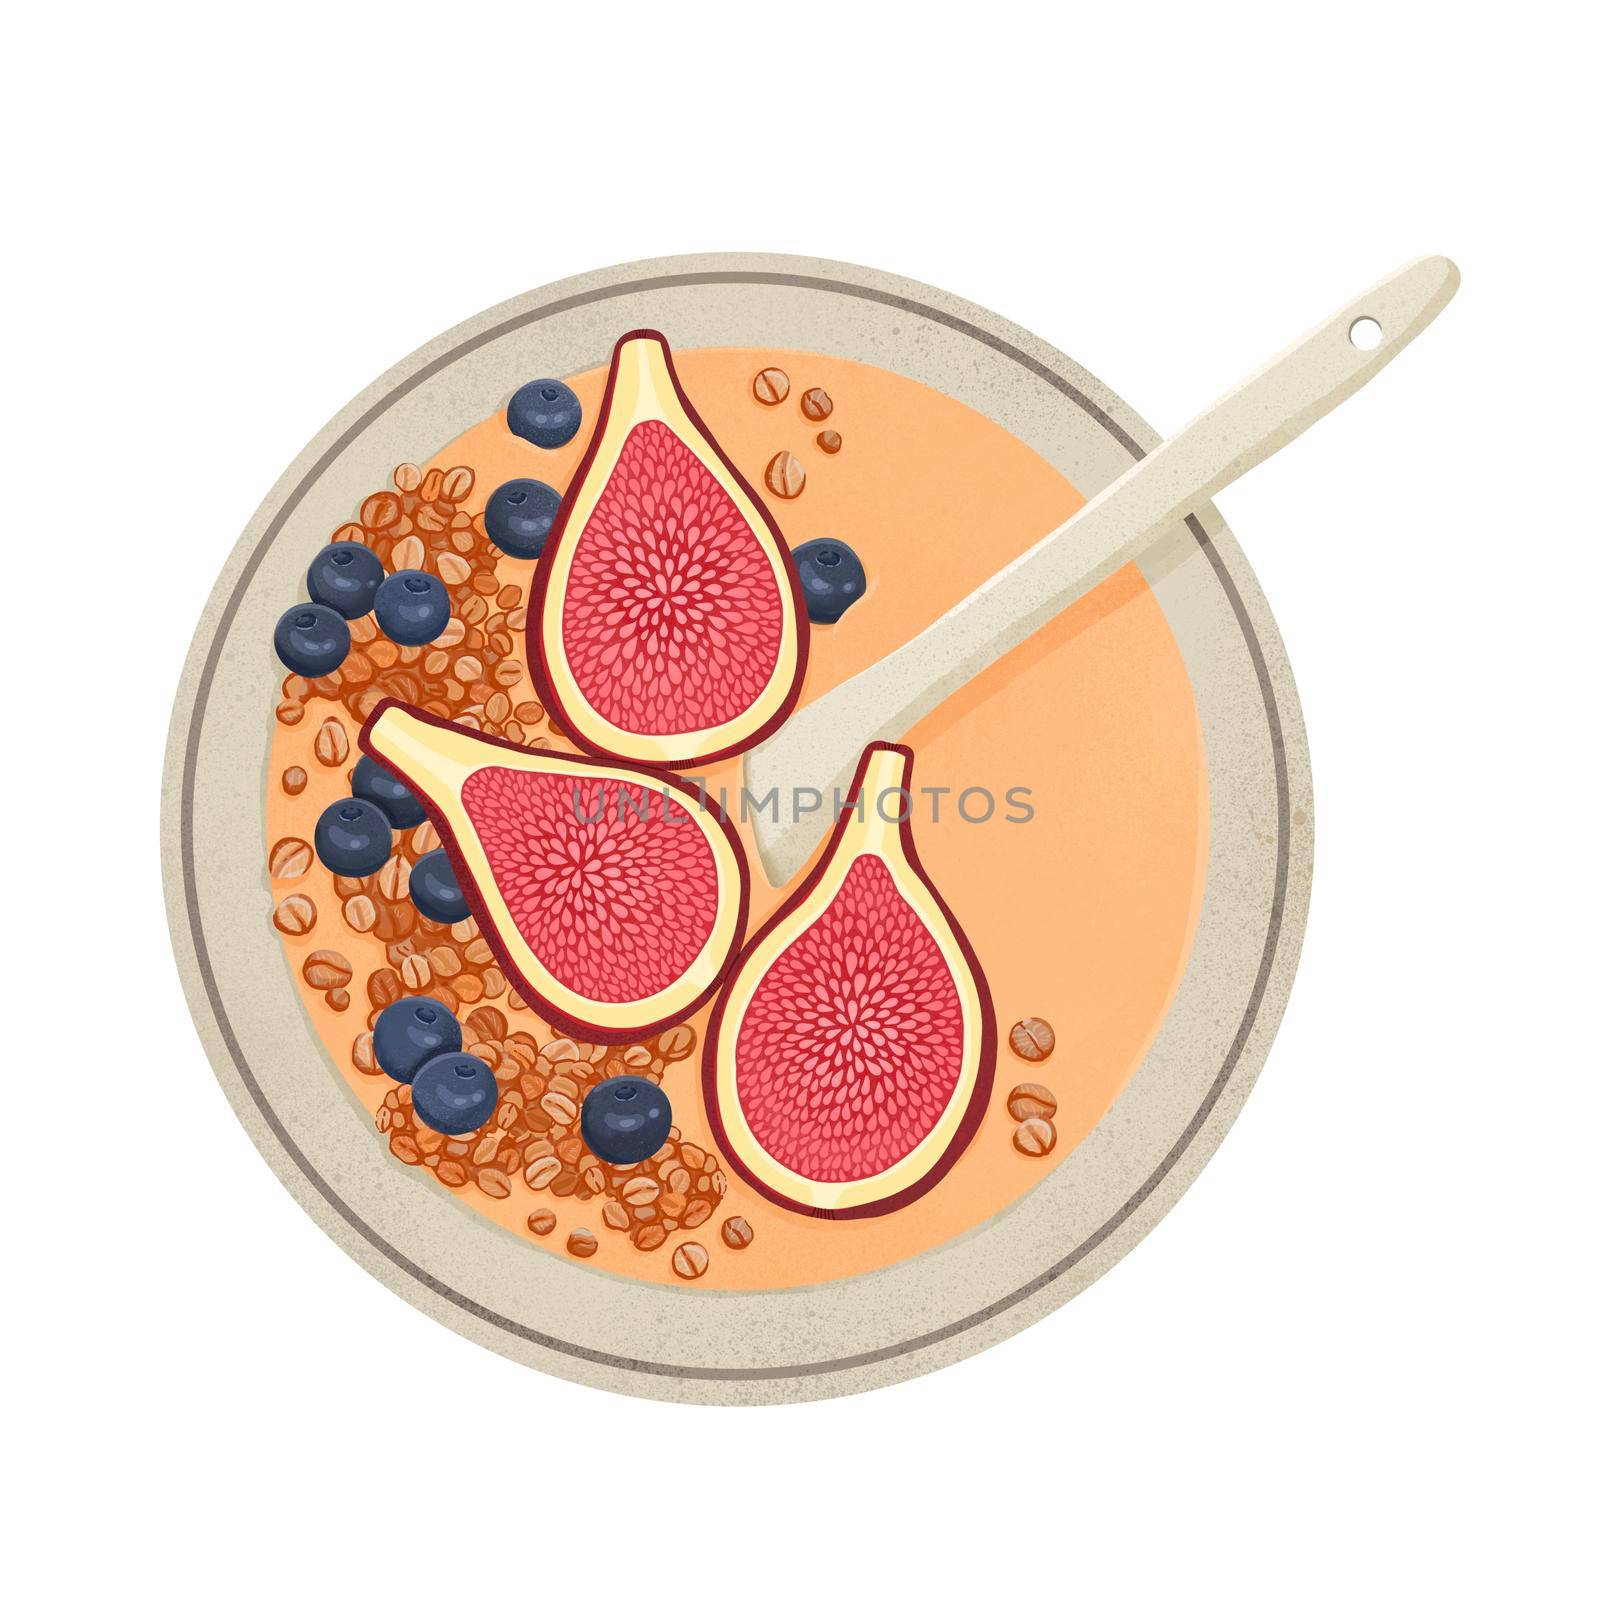 Smoothie bowl with figs, oats and blueberry. High quality illustration